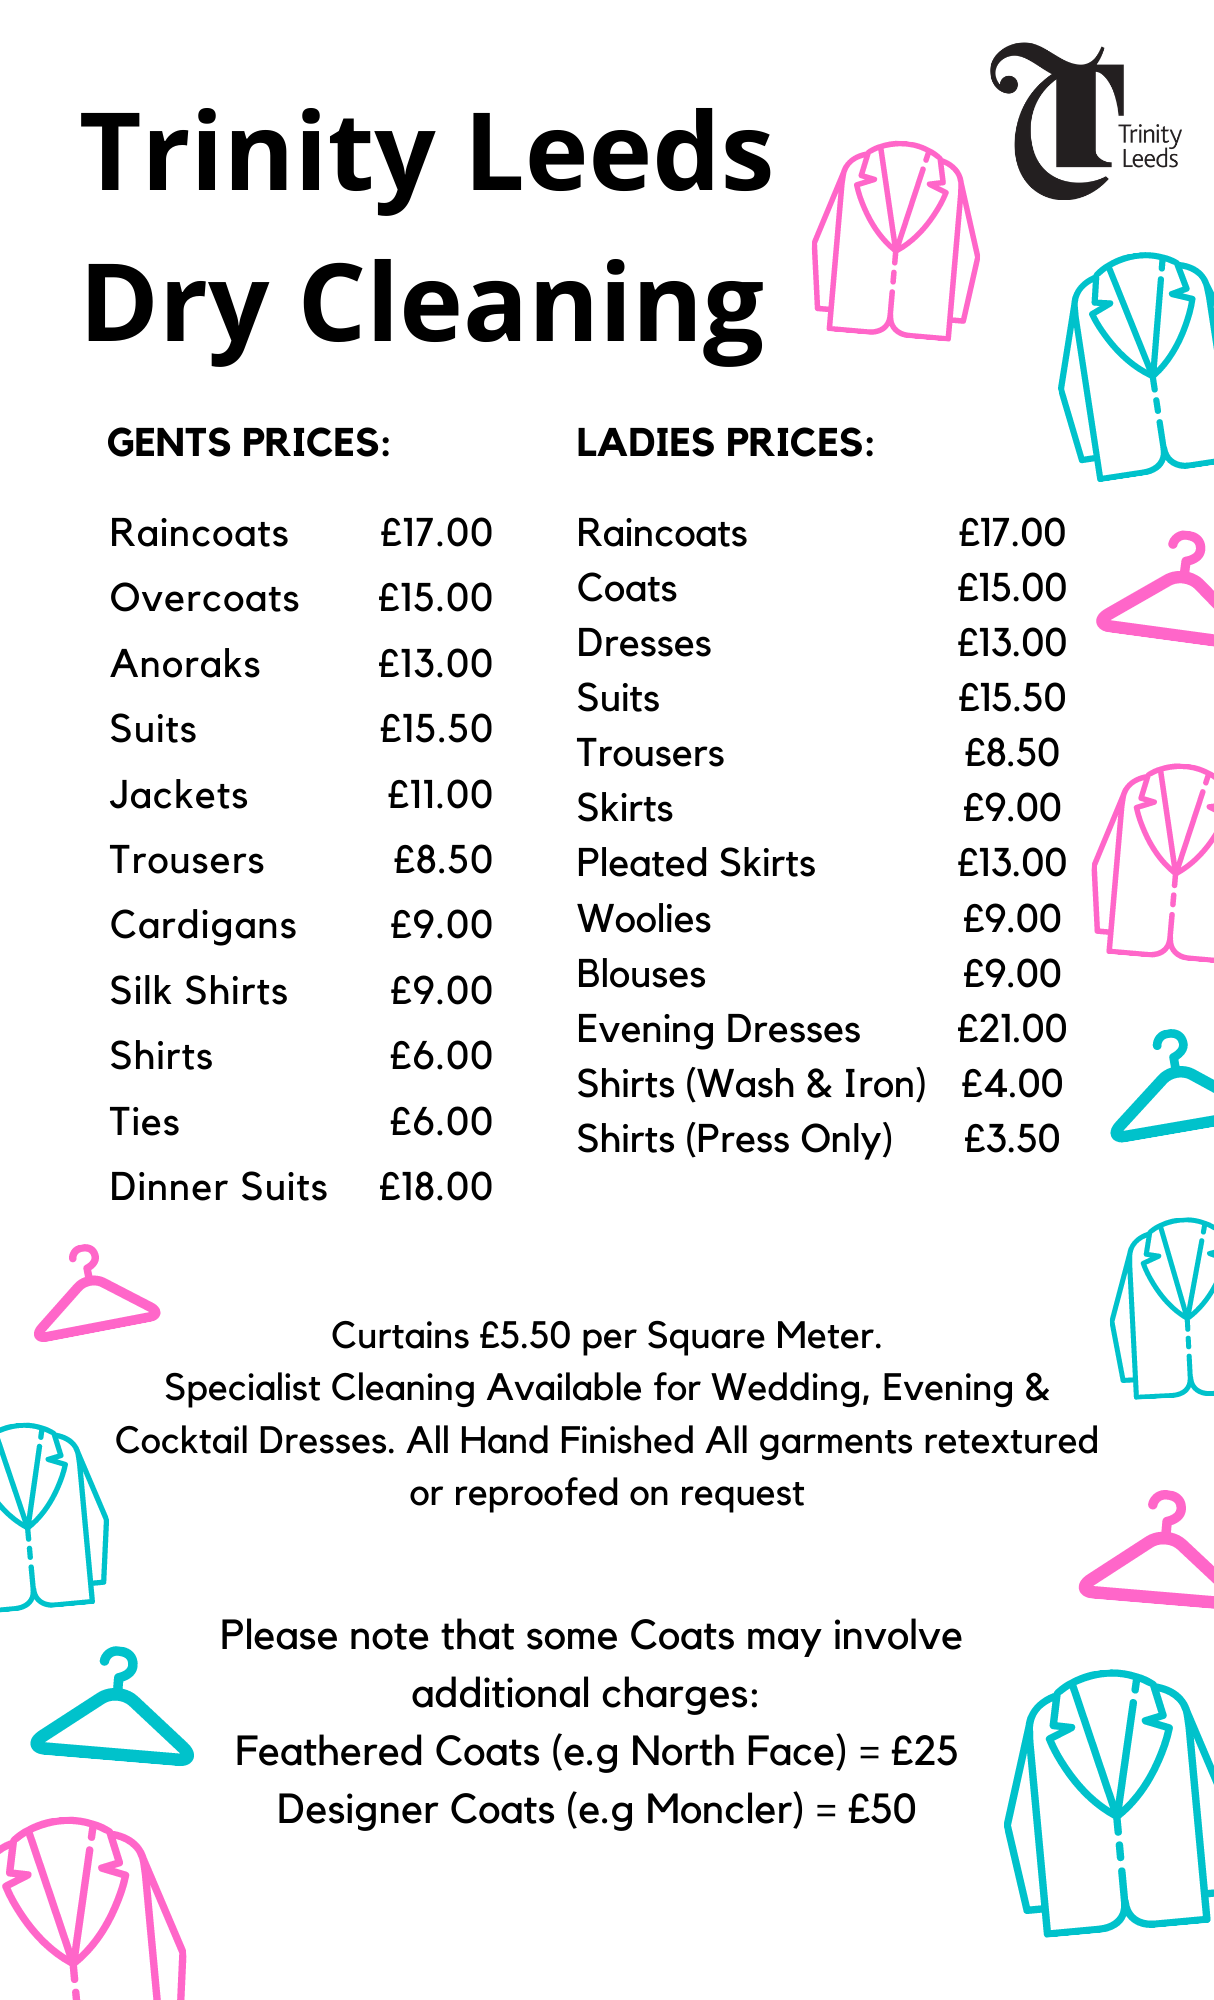 Dry cleaning price list